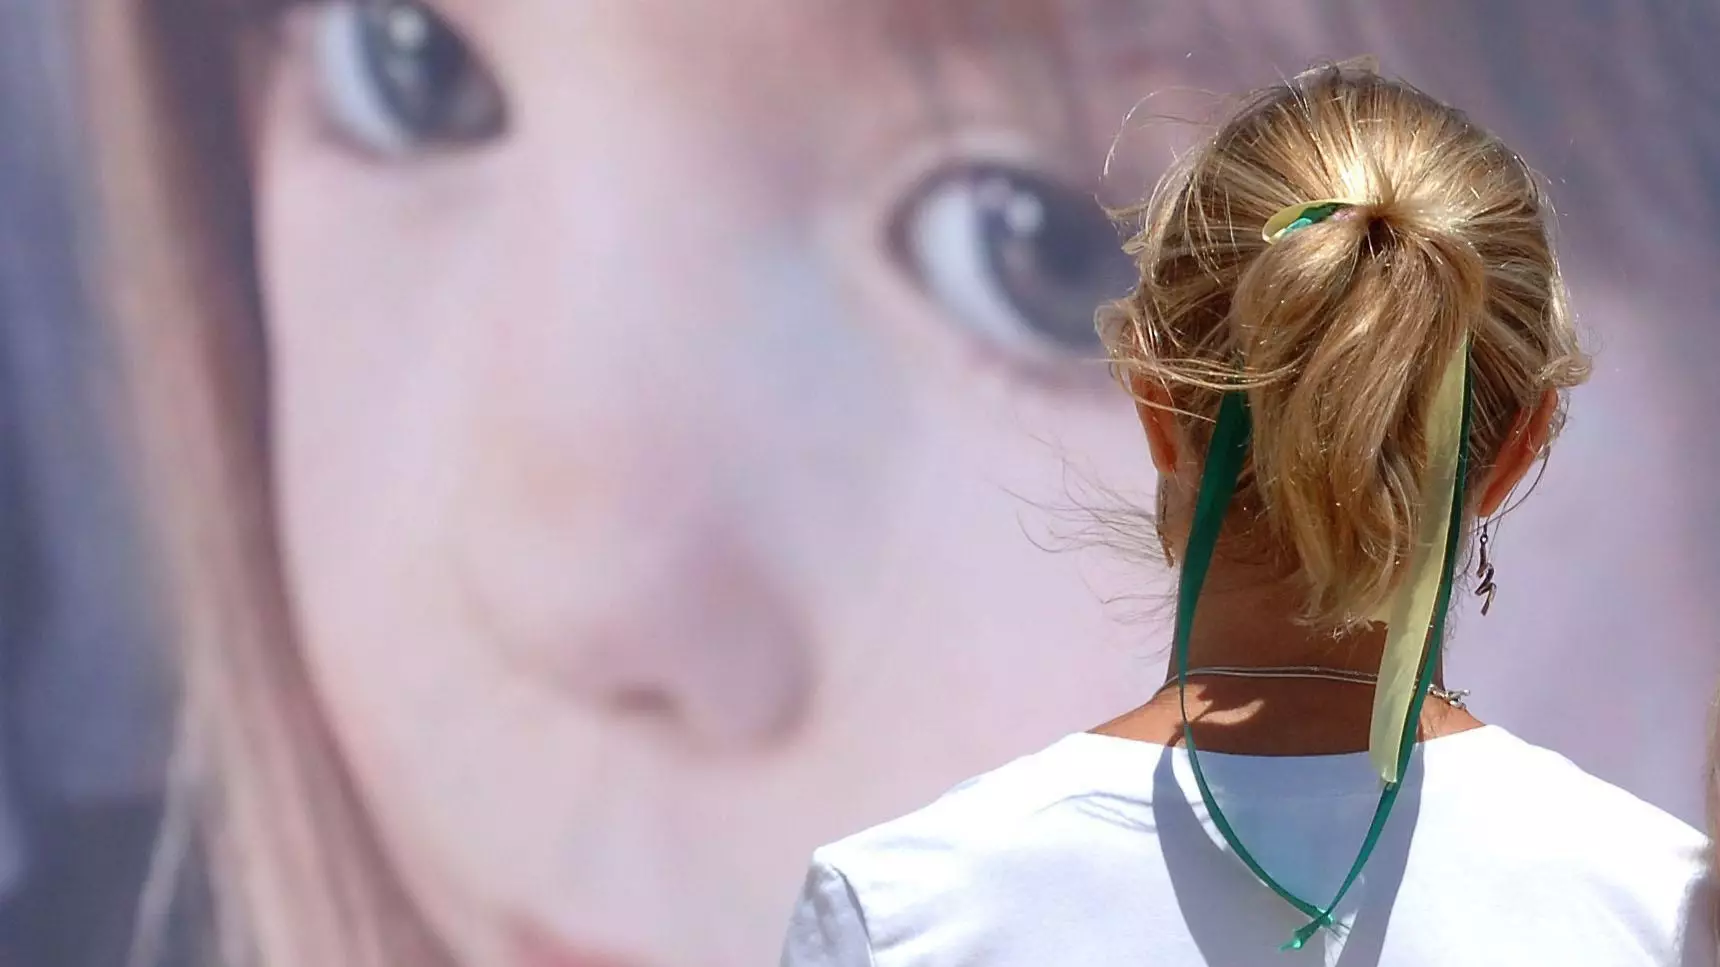 Madeleine McCann Cop Explains Theory That Her Body Was Stored In Freezer For 25 Days